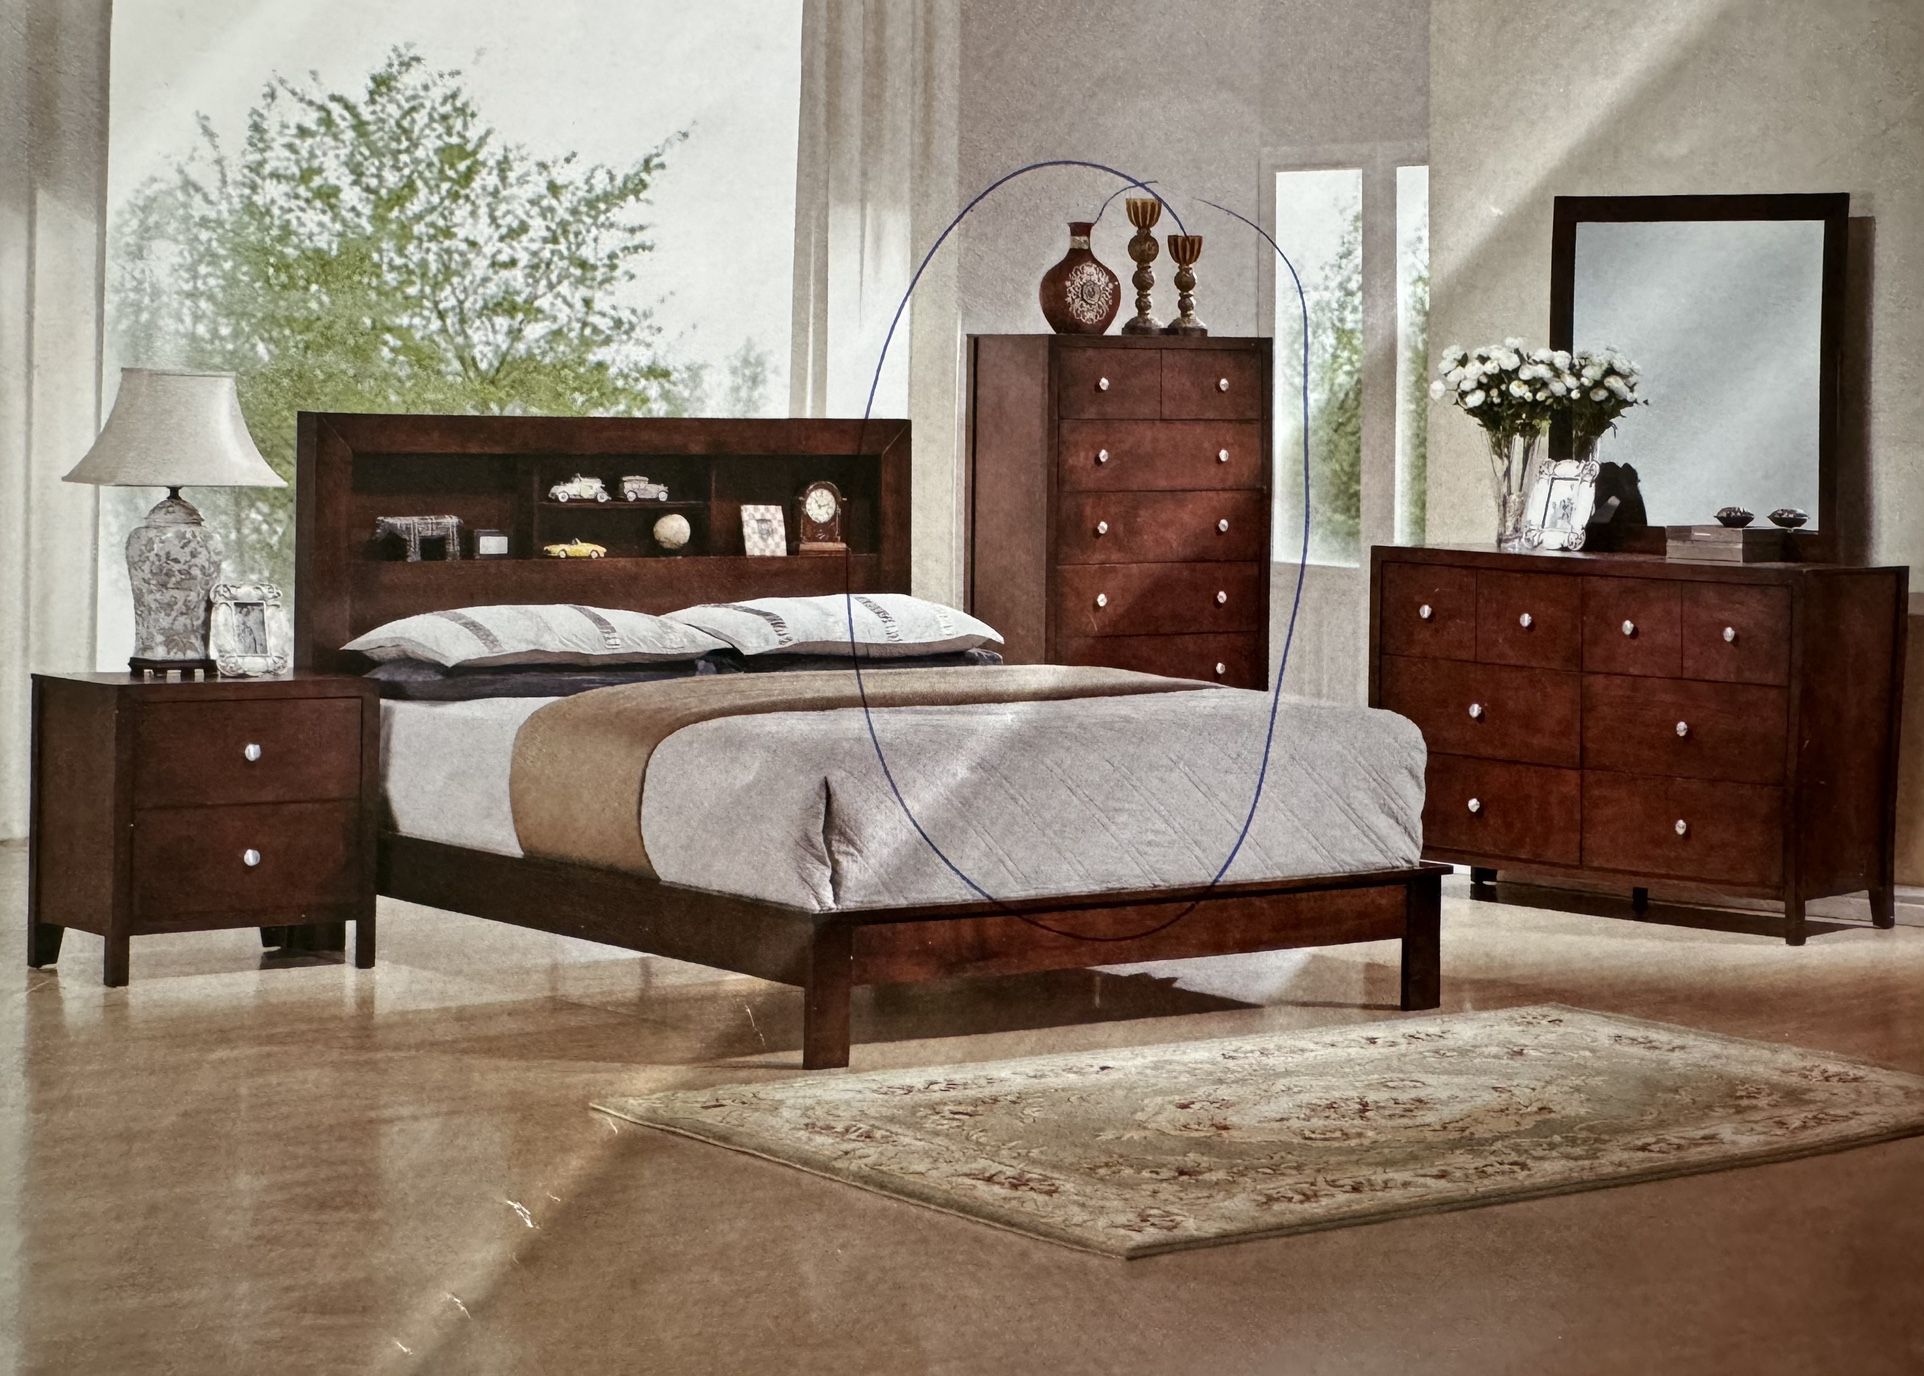 70% SALE King Size Bed